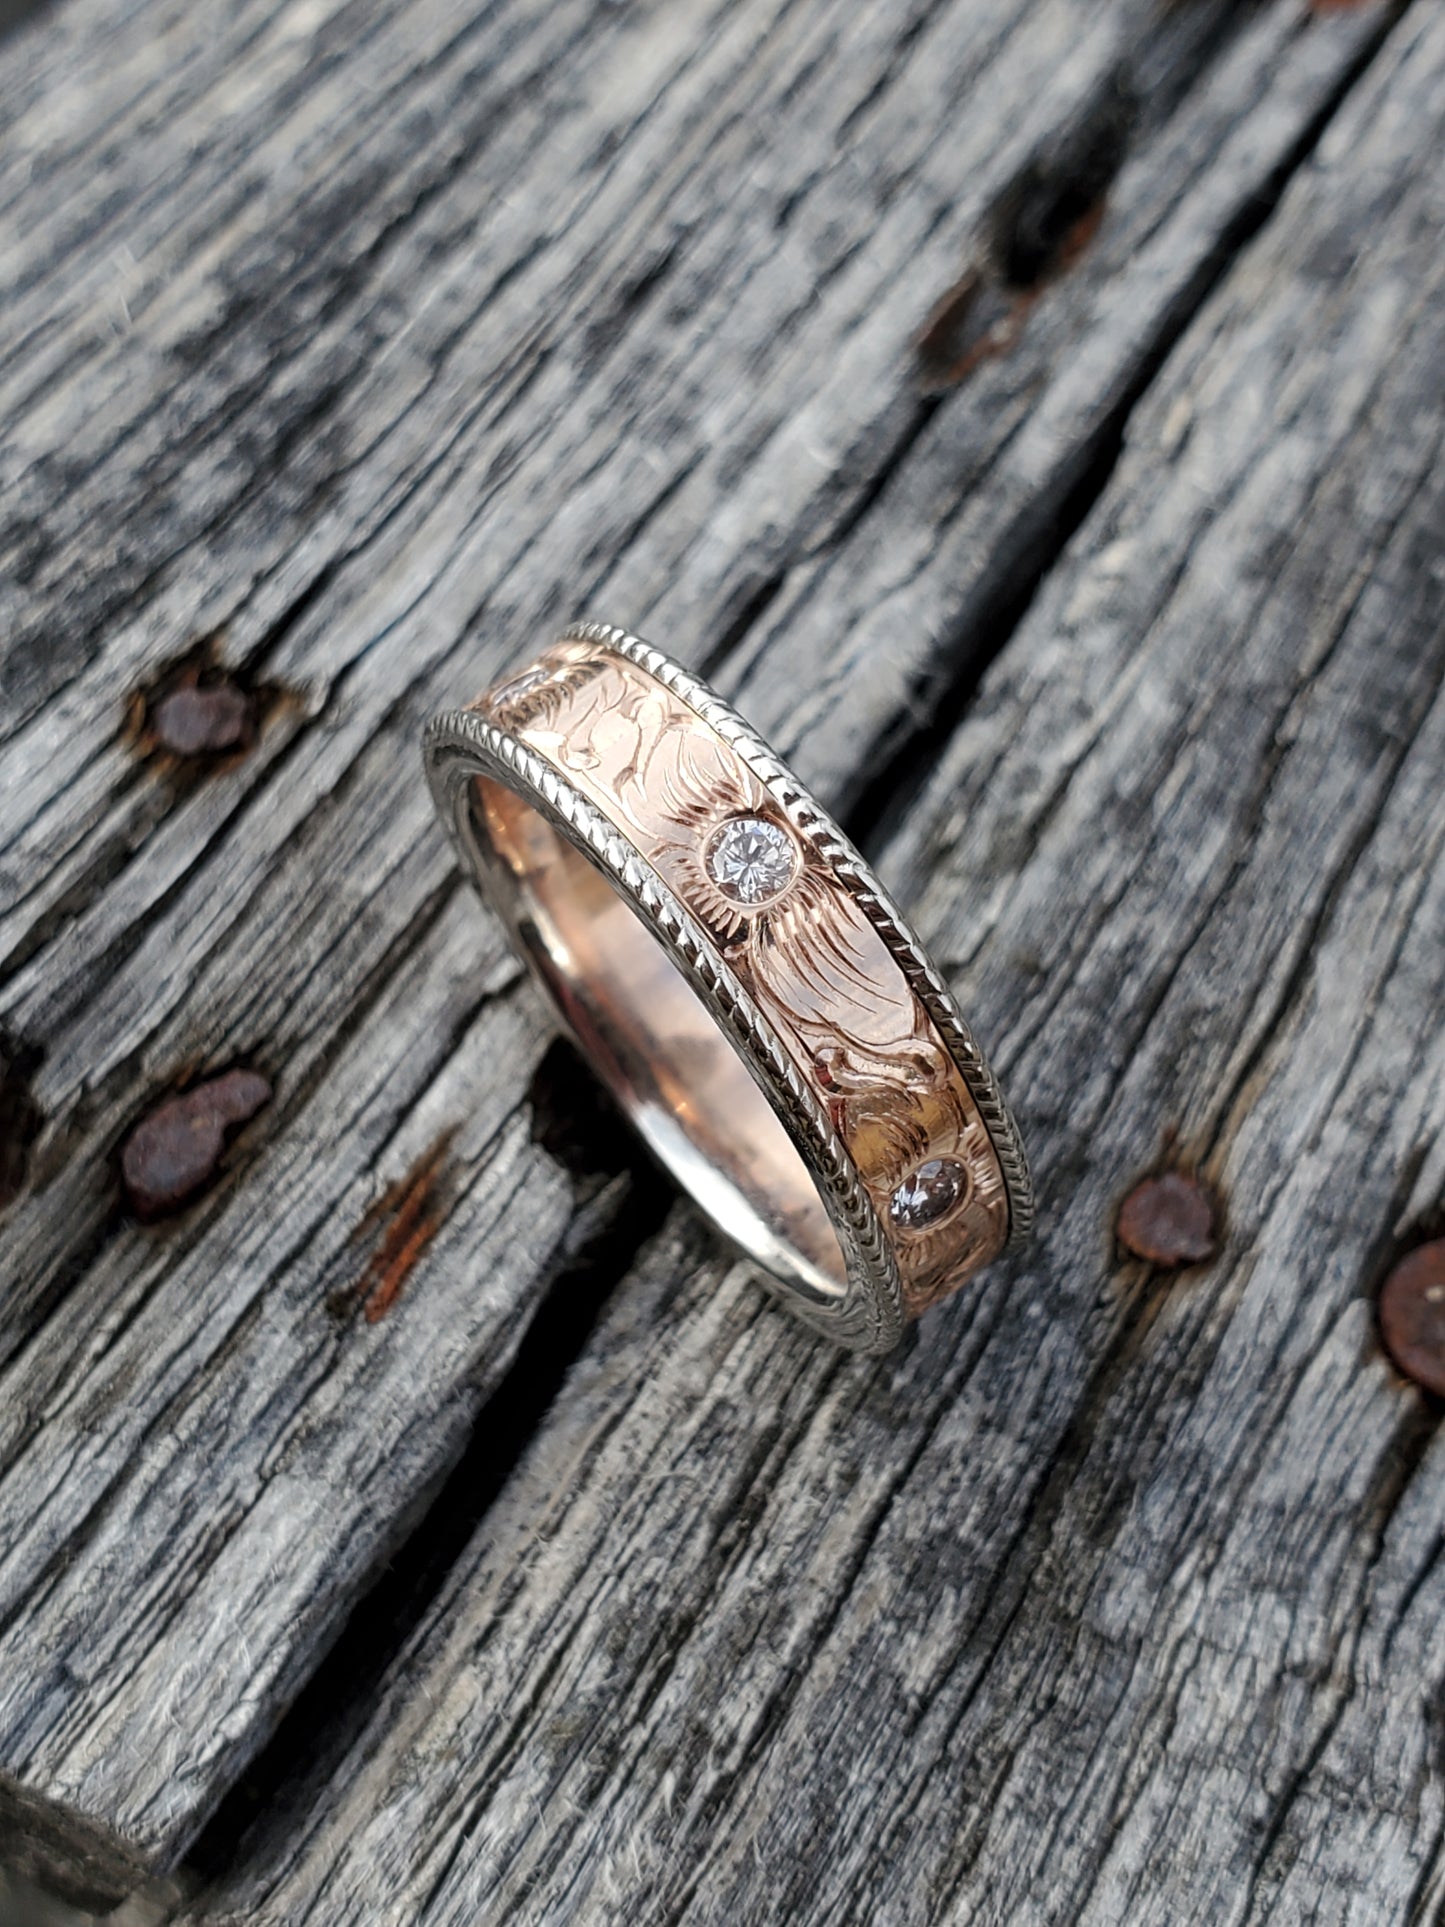 The Magnolia: 10K Rose Gold and Diamond Wedding Ring, Hand-Engraved Floral Ring with Diamond Centers, Flower Wedding Ring, Western Wedding Band, Cowgirl Wedding Ring